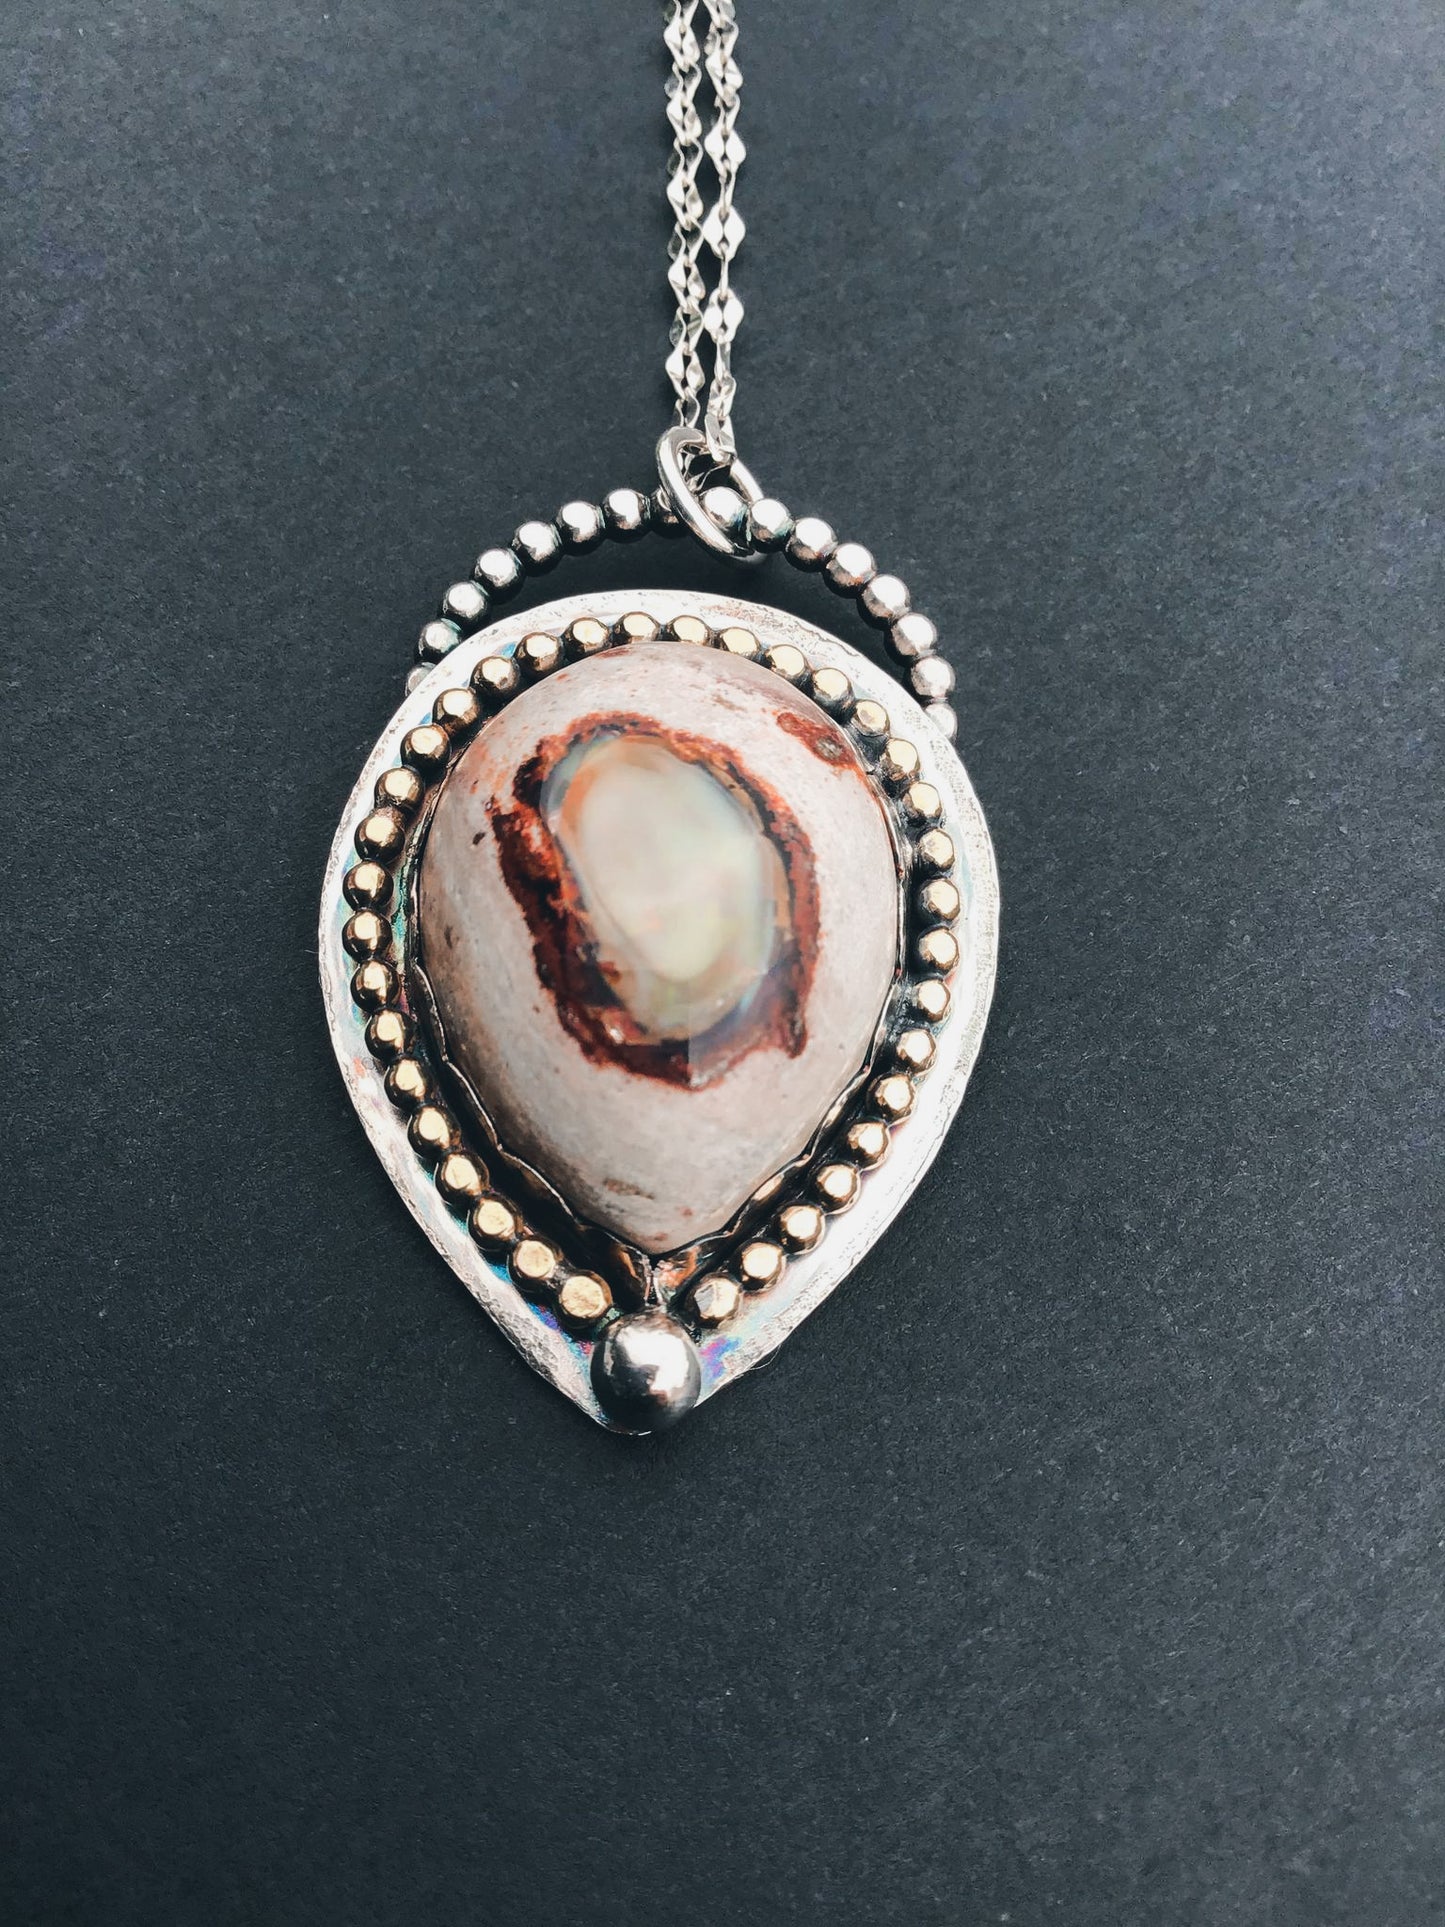 Rare and Stunning Mexican Fire opal in stone Necklace